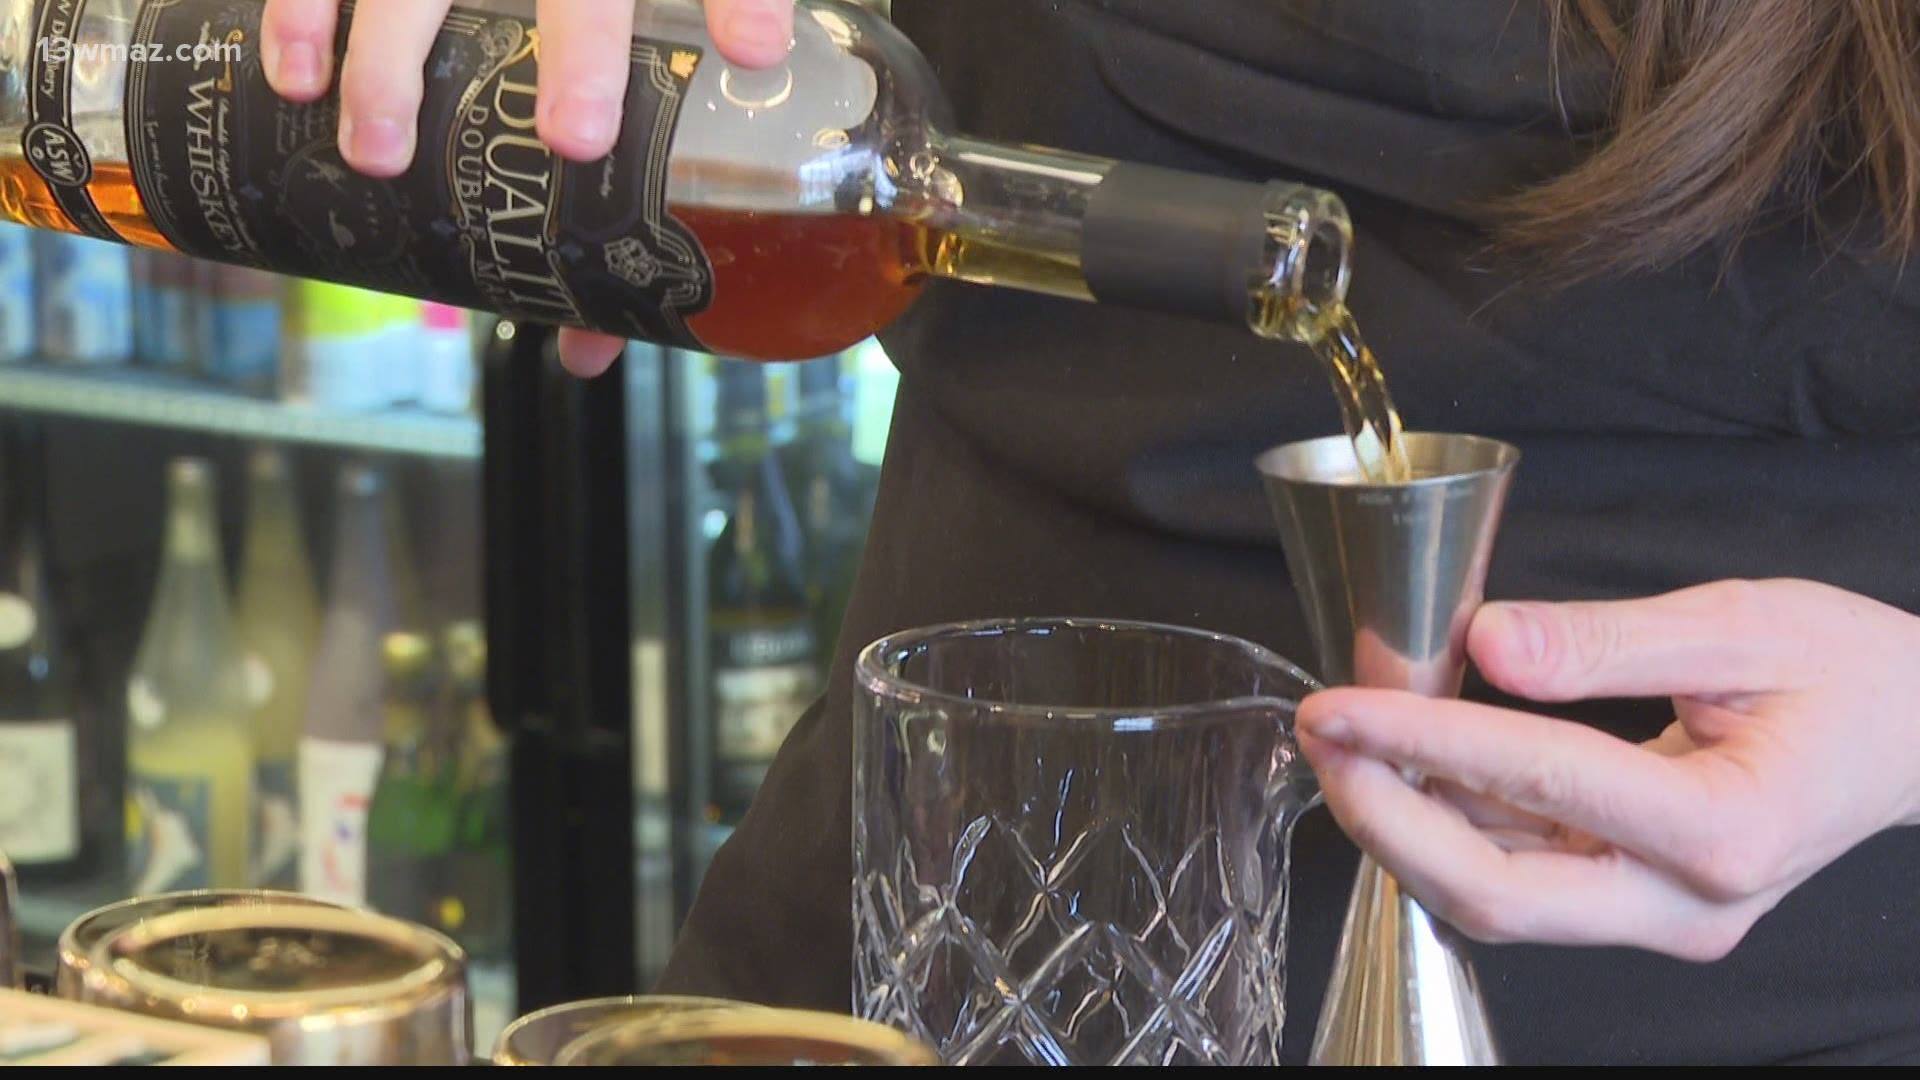 Next time you order take out, you could have the option to add on a to-go cocktail. Governor Brian Kemp says he plans to sign Senate Bill 236 into law Wednesday